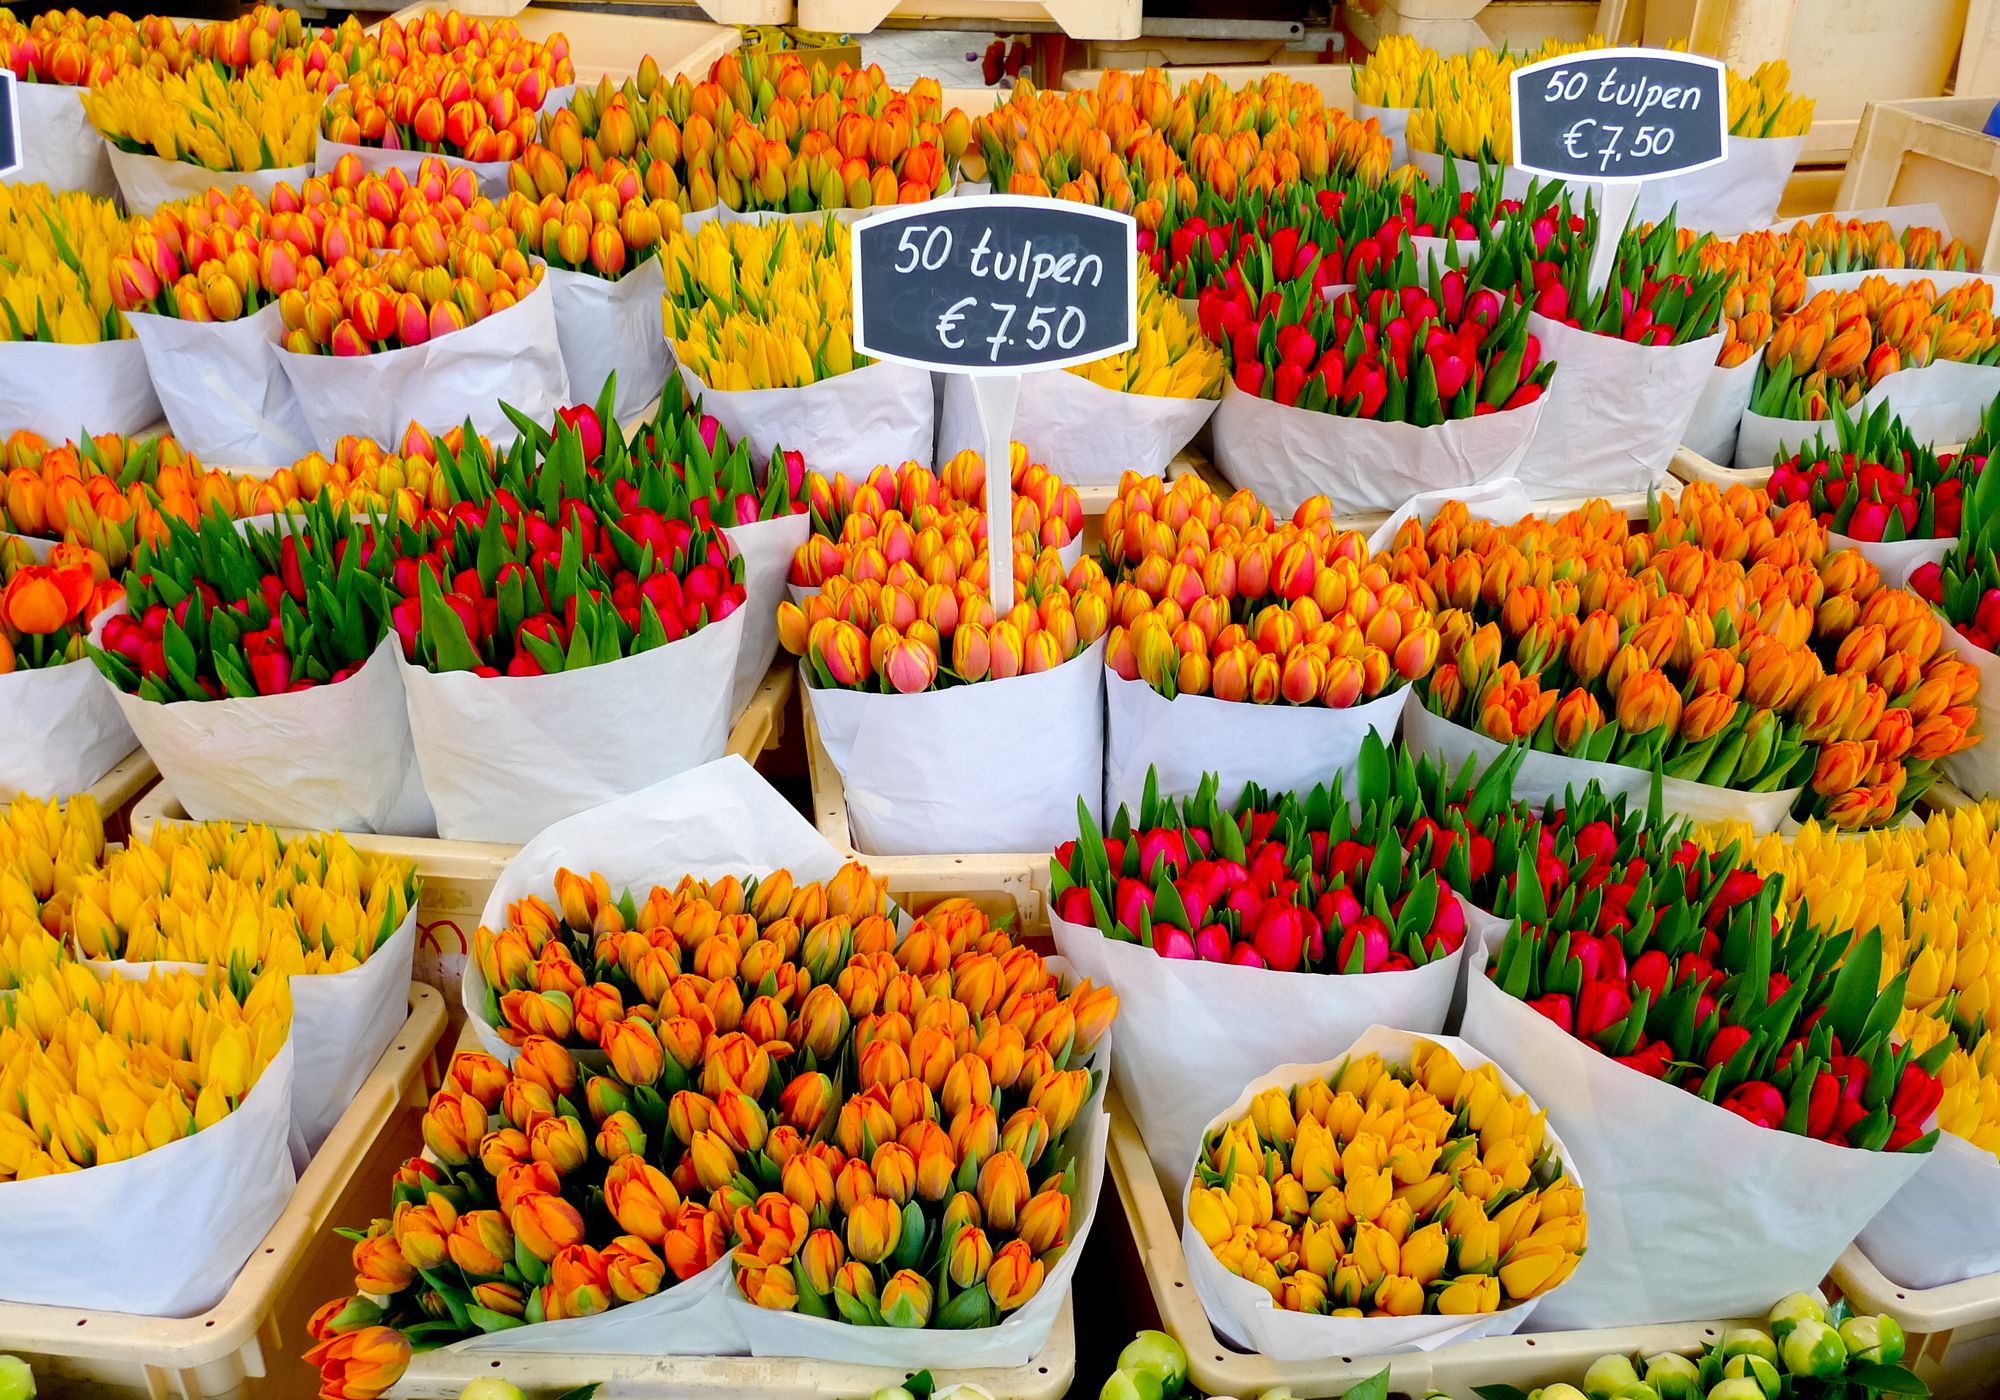 Best Time To Visit Amsterdam For Tulips